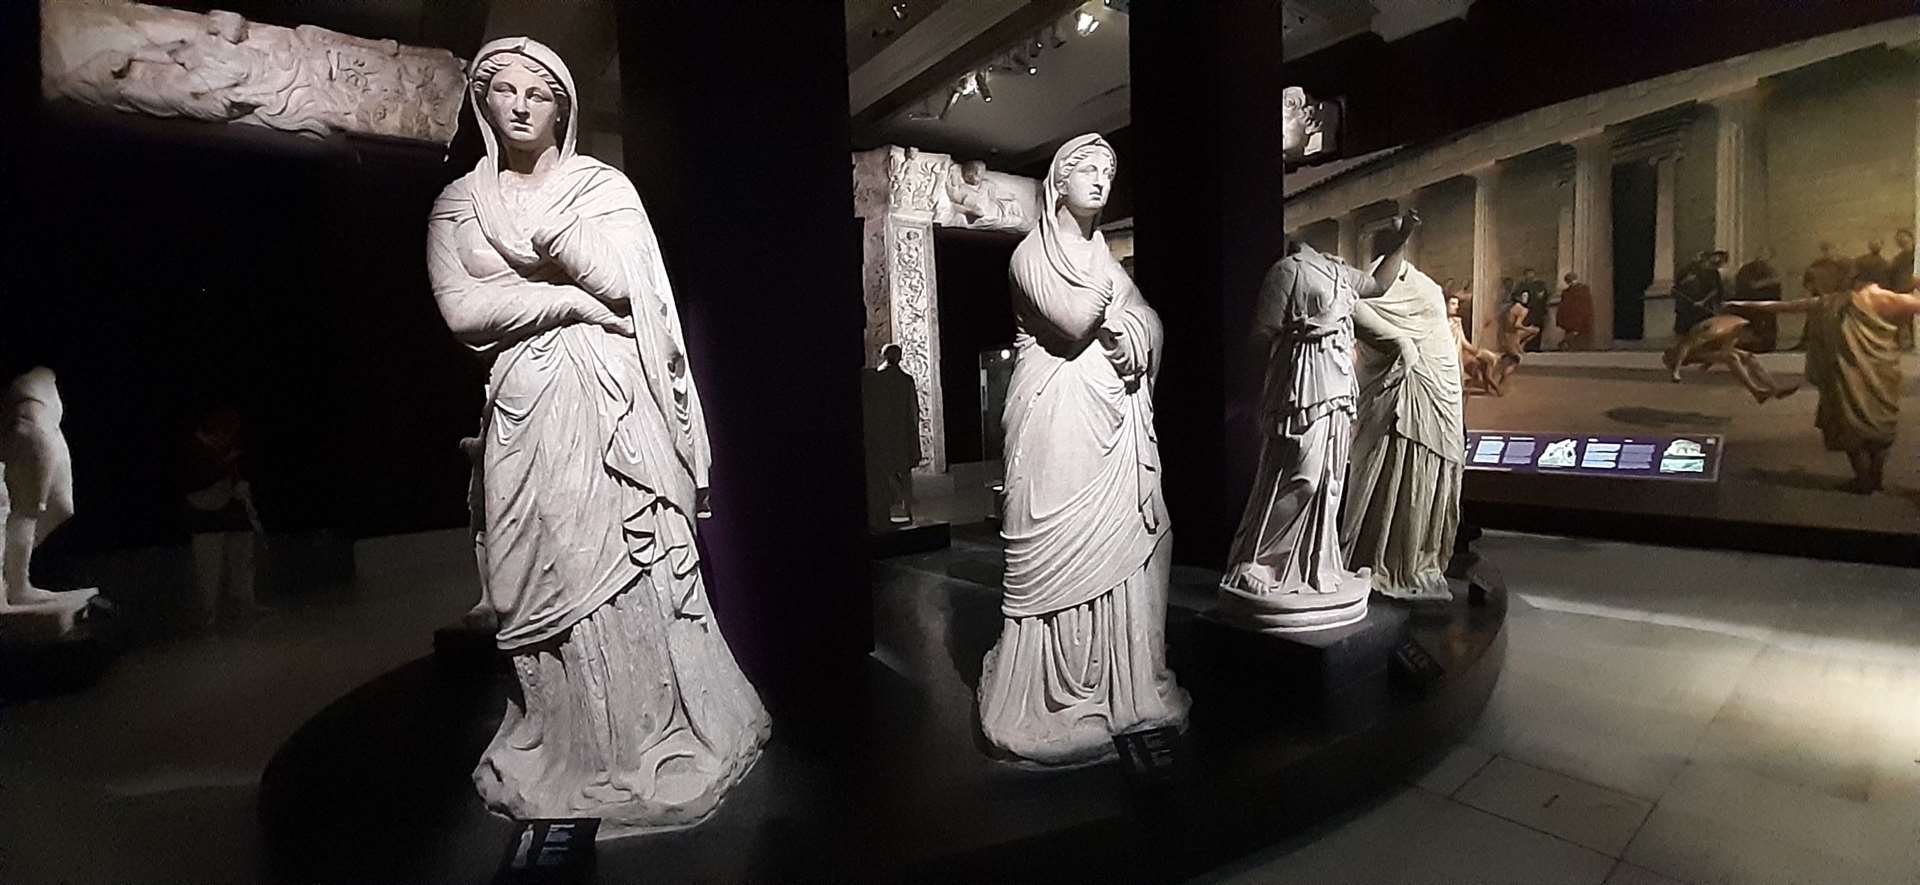 Art and culture combine at the Istanbul's Archaeology Museum. Photo: Sean Delaney